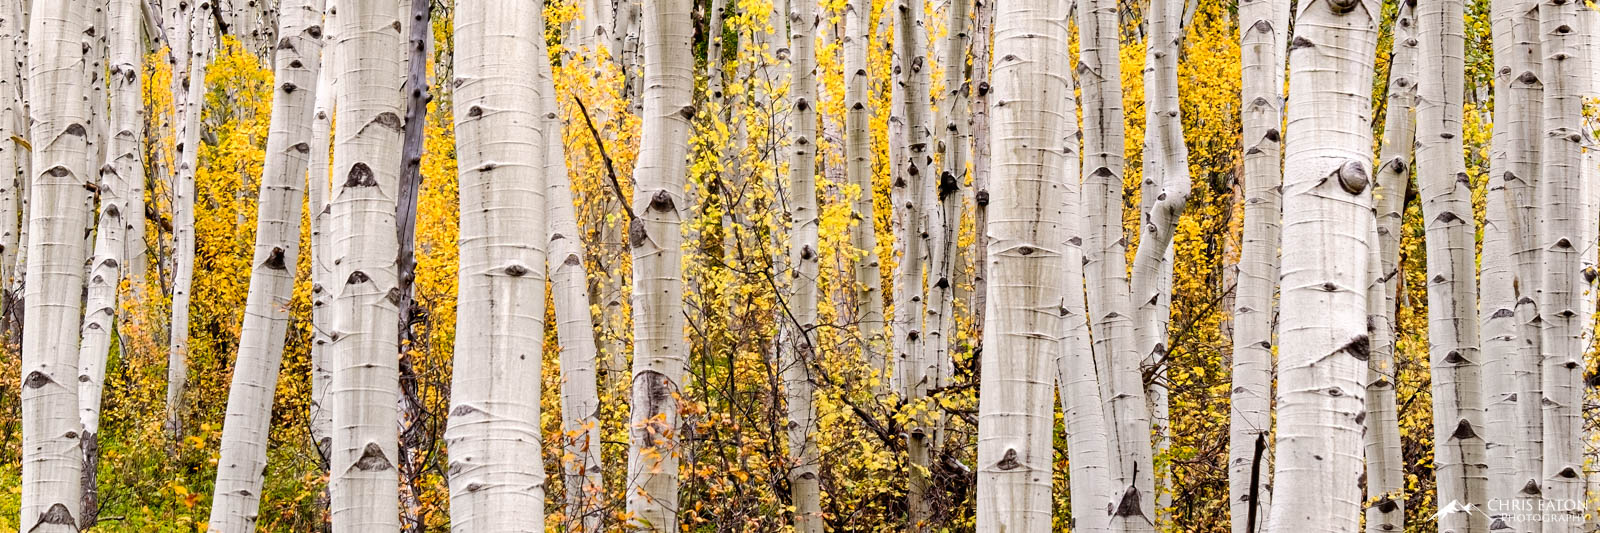 Quaking Aspens (Populus tremula) grow throughout the forests of western North America. The are usually one of the species to...